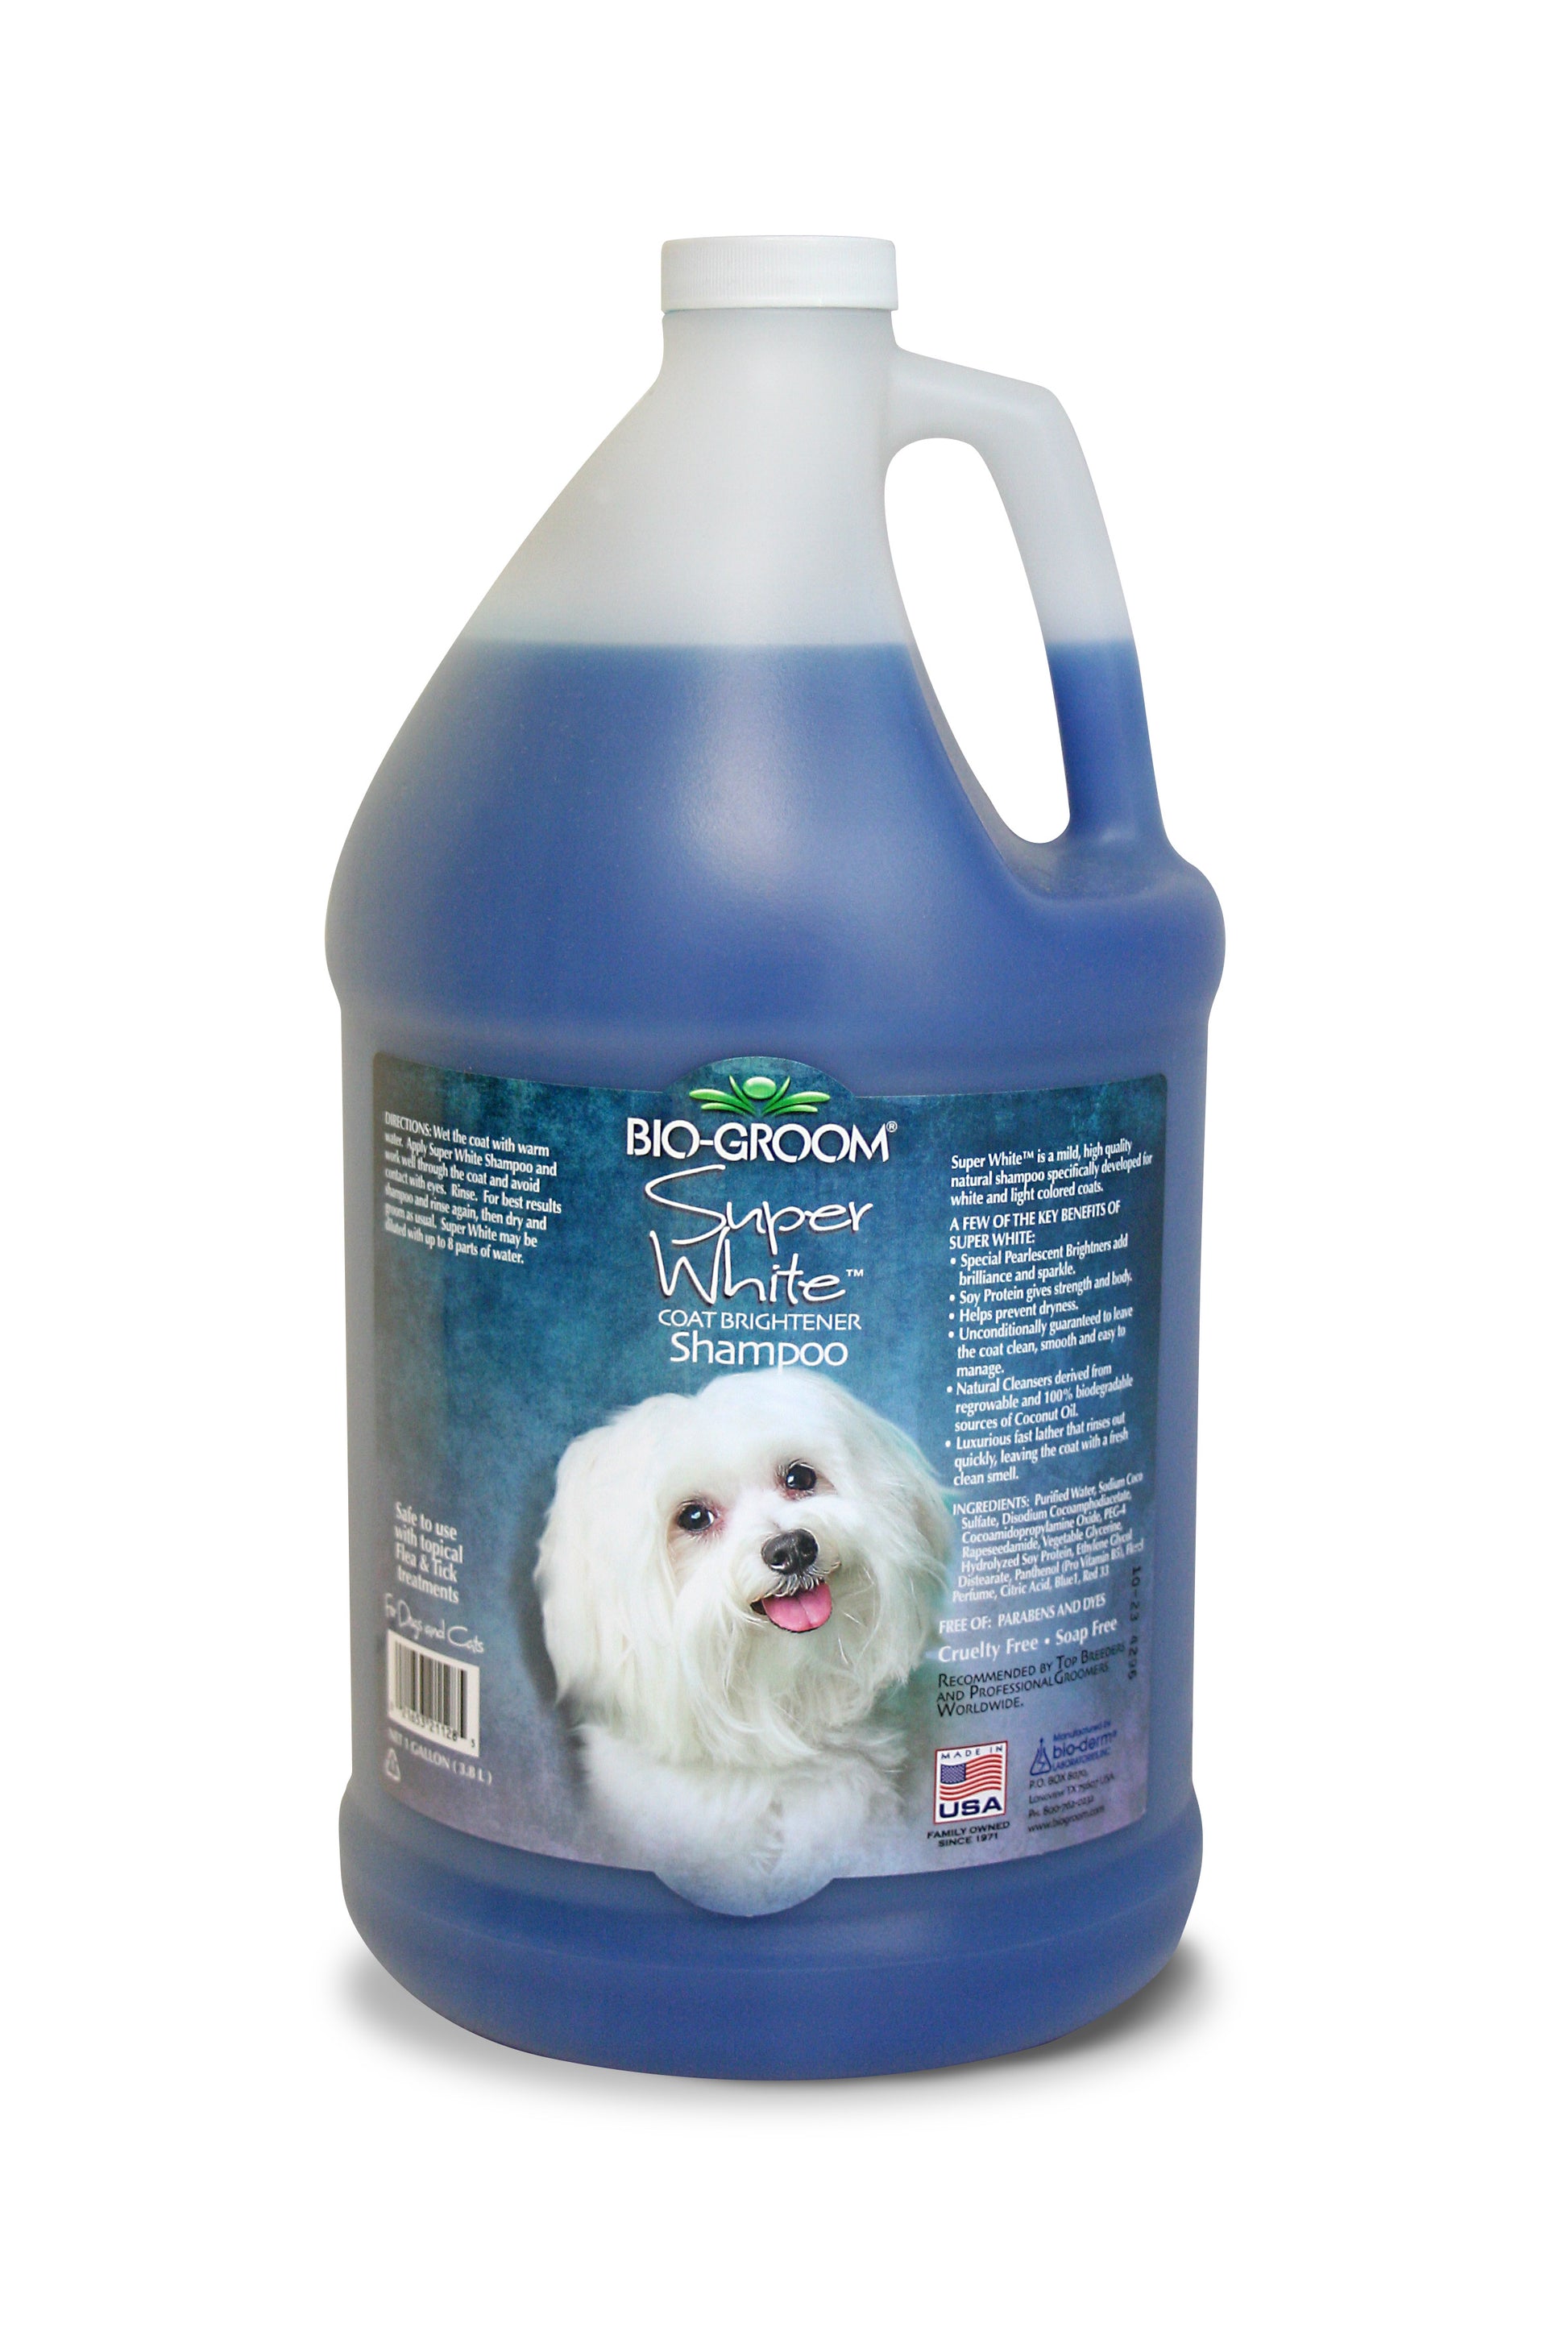 Bio-Groom Super White™ Coat Brightener Dog Shampoo is formulated for white and light-colored coats. Prevents dryness and provides strength and body  leaving it clean, smooth, and easy to manage. 100% biodegradable, free of parabens and dyes.  1 Gallon.